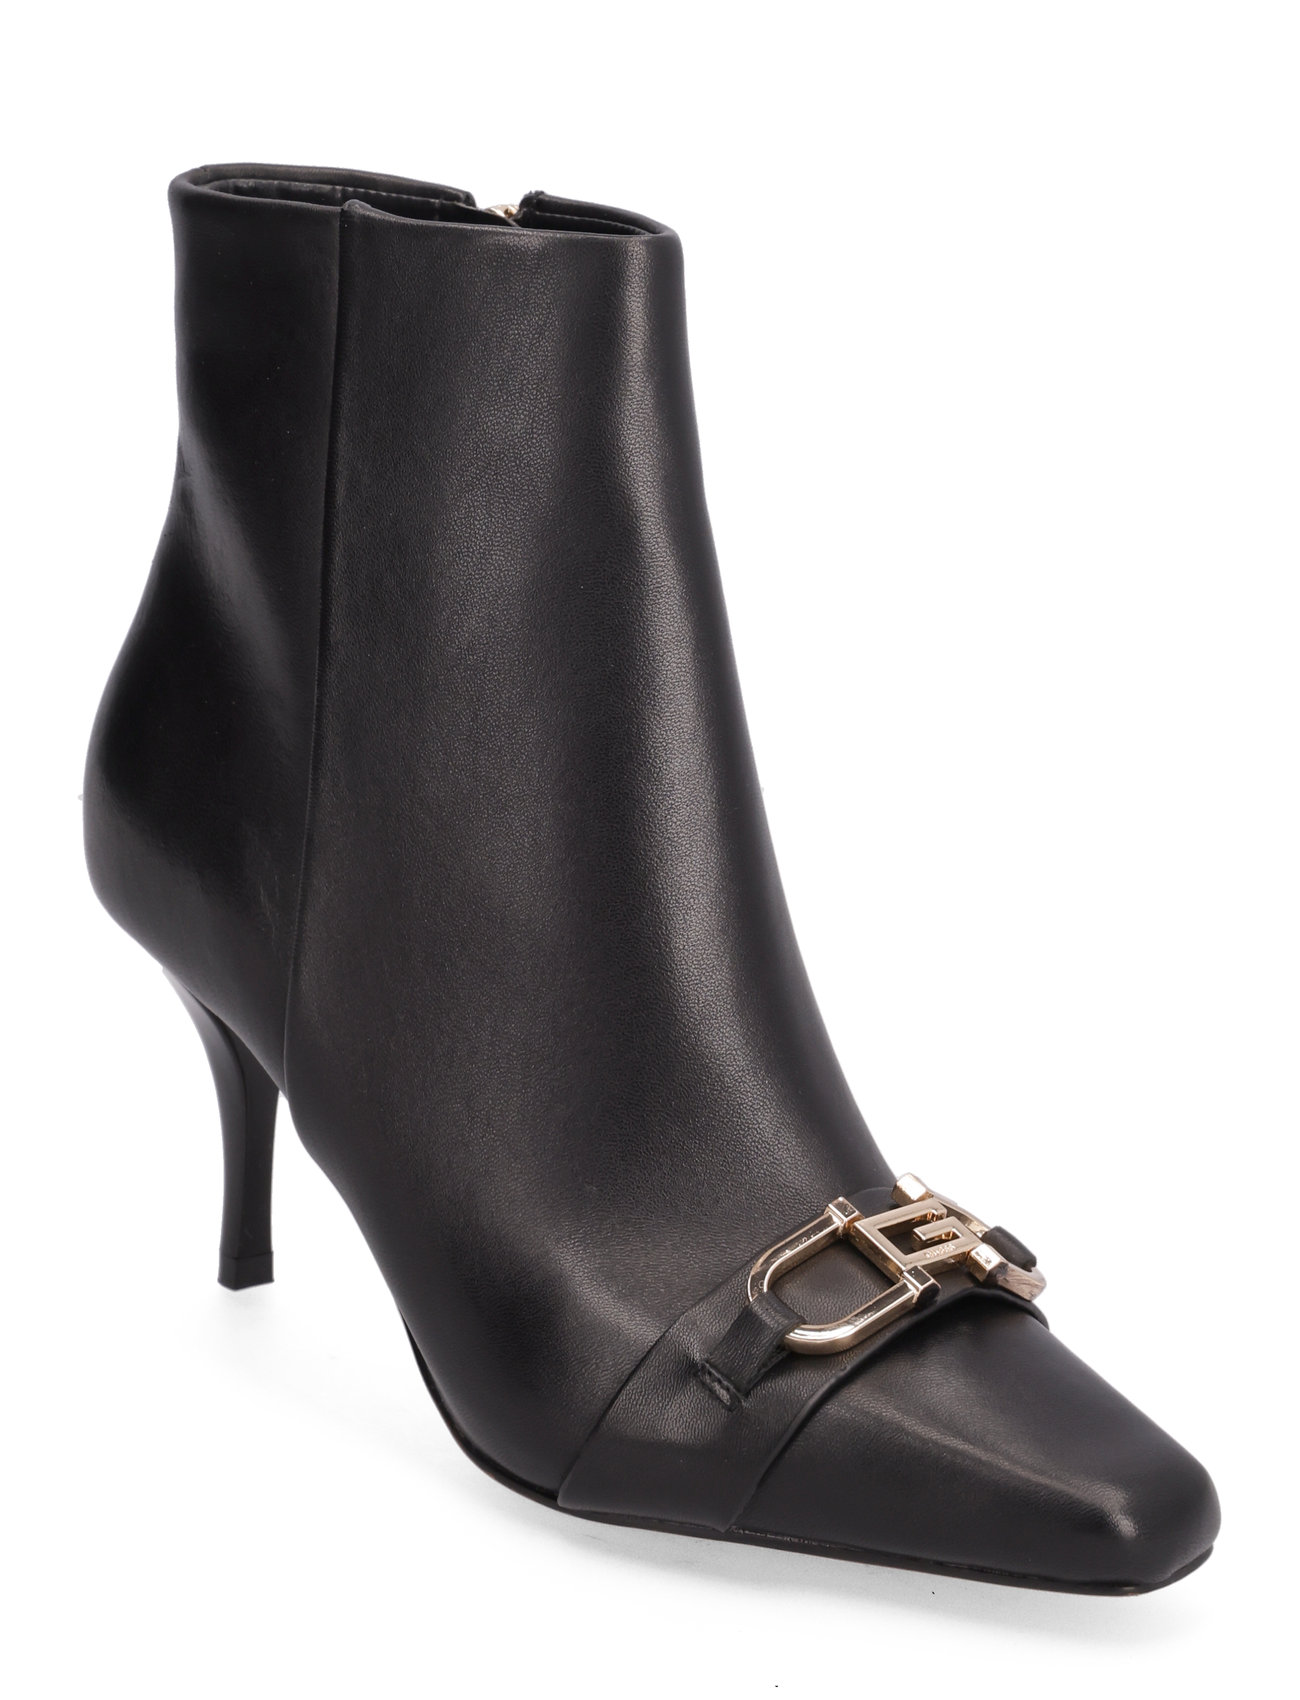 Silene Shoes Boots Ankle Boots Ankle Boots With Heel Black GUESS